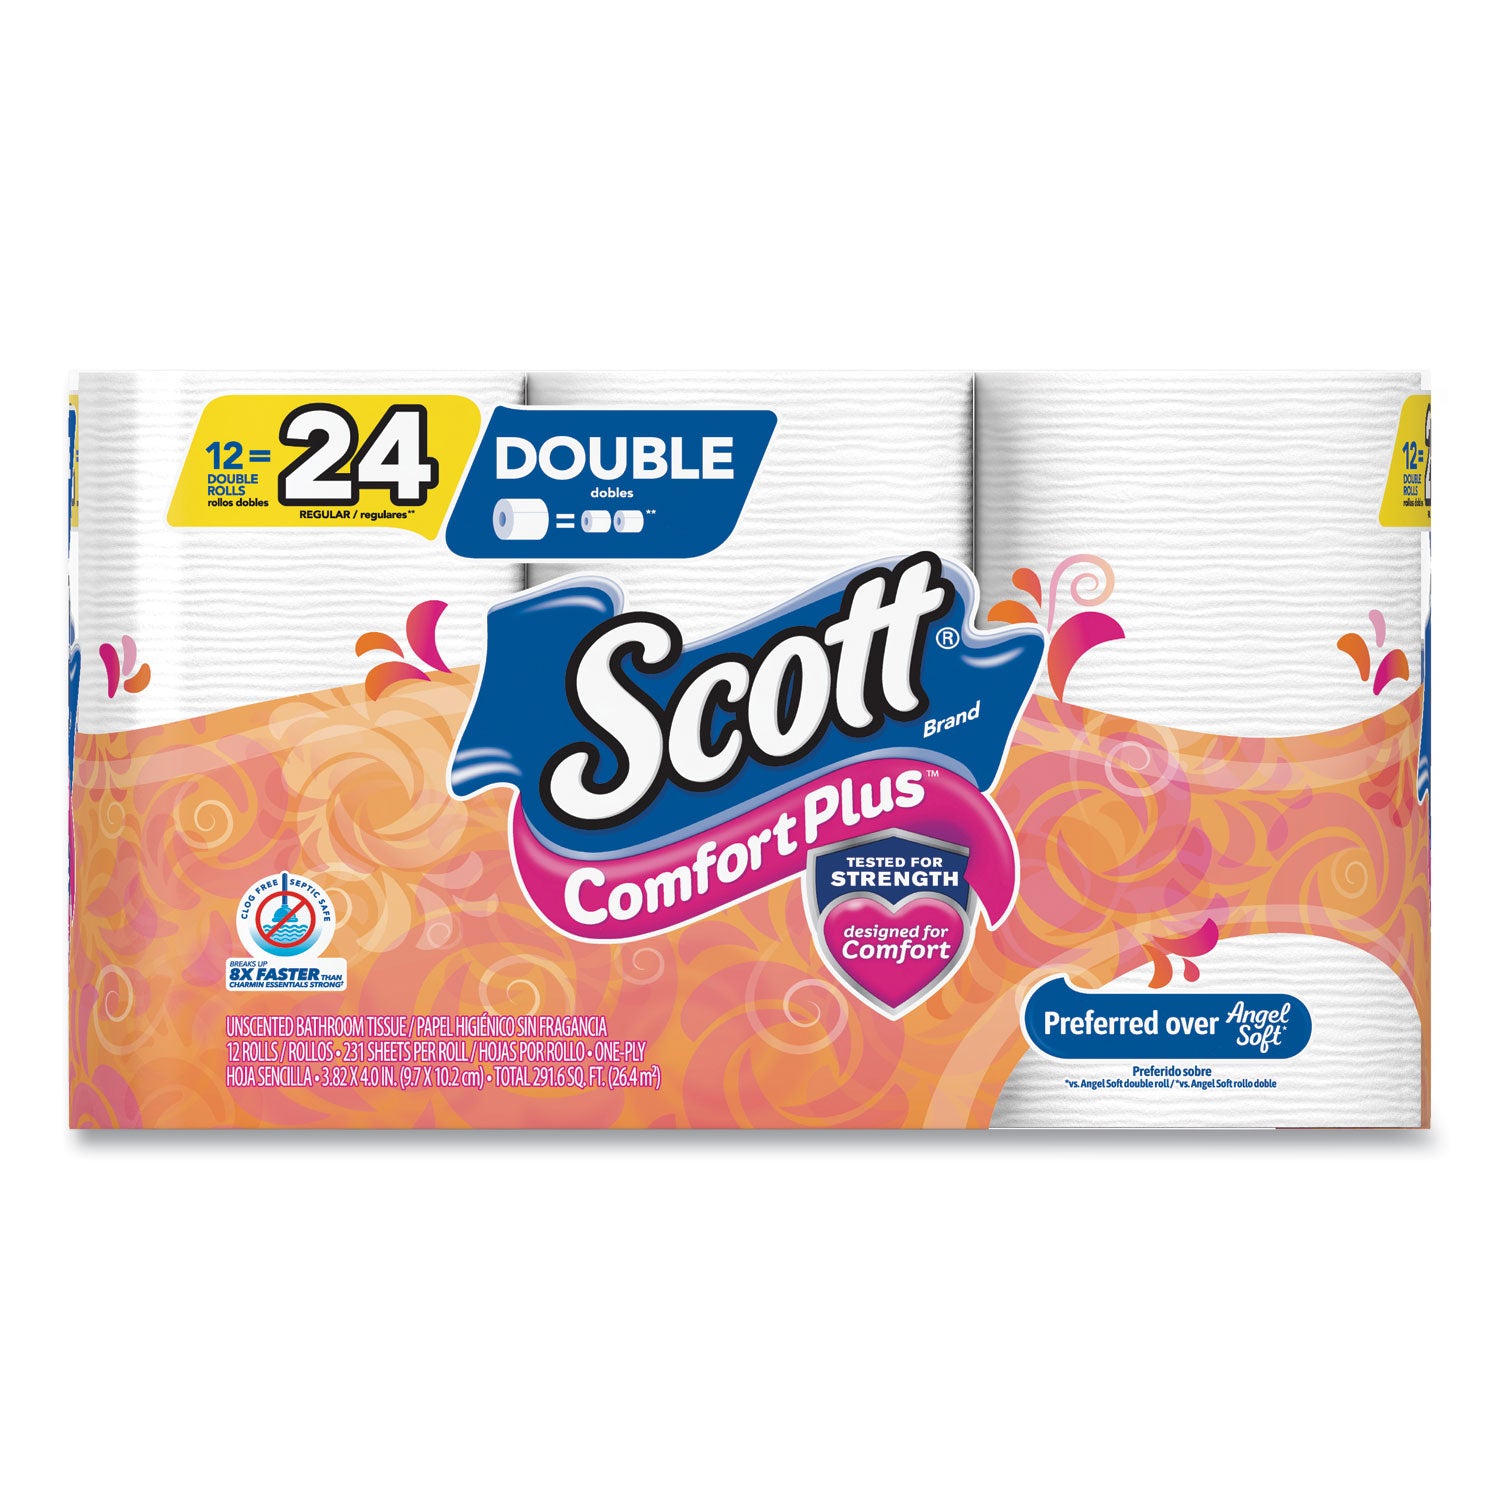 comfortplus-toilet-paper-double-roll-bath-tissue-septic-safe-1-ply-white-231-sheets-roll-12-rolls-pack-4-packs-carton_kcc47618 - 4